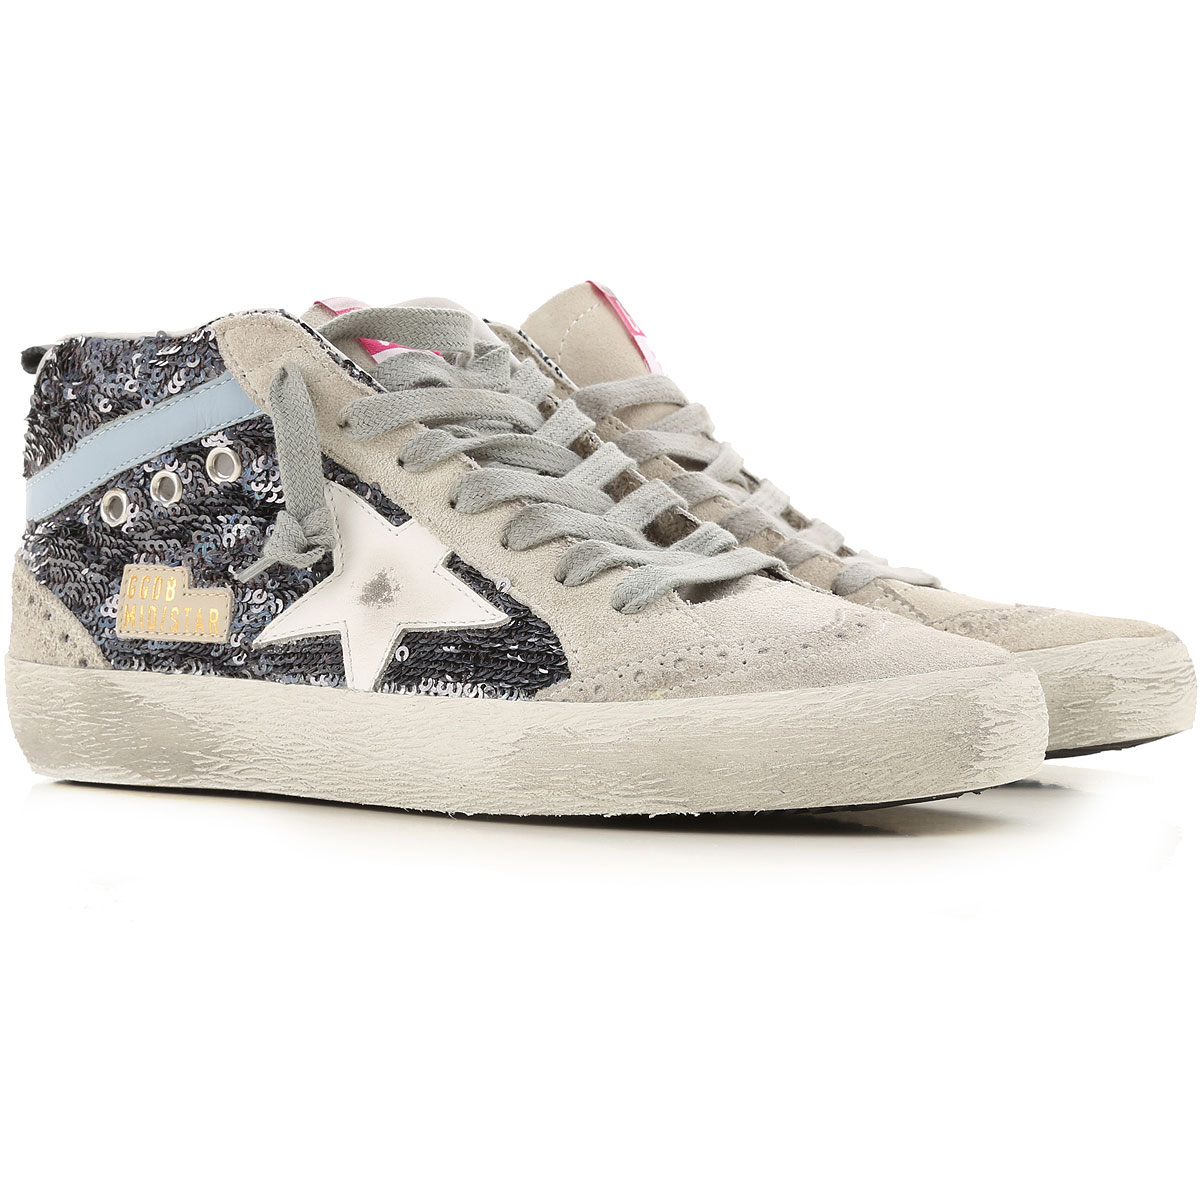 Womens Shoes Golden Goose, Style code: g36ws634-v2-midstar